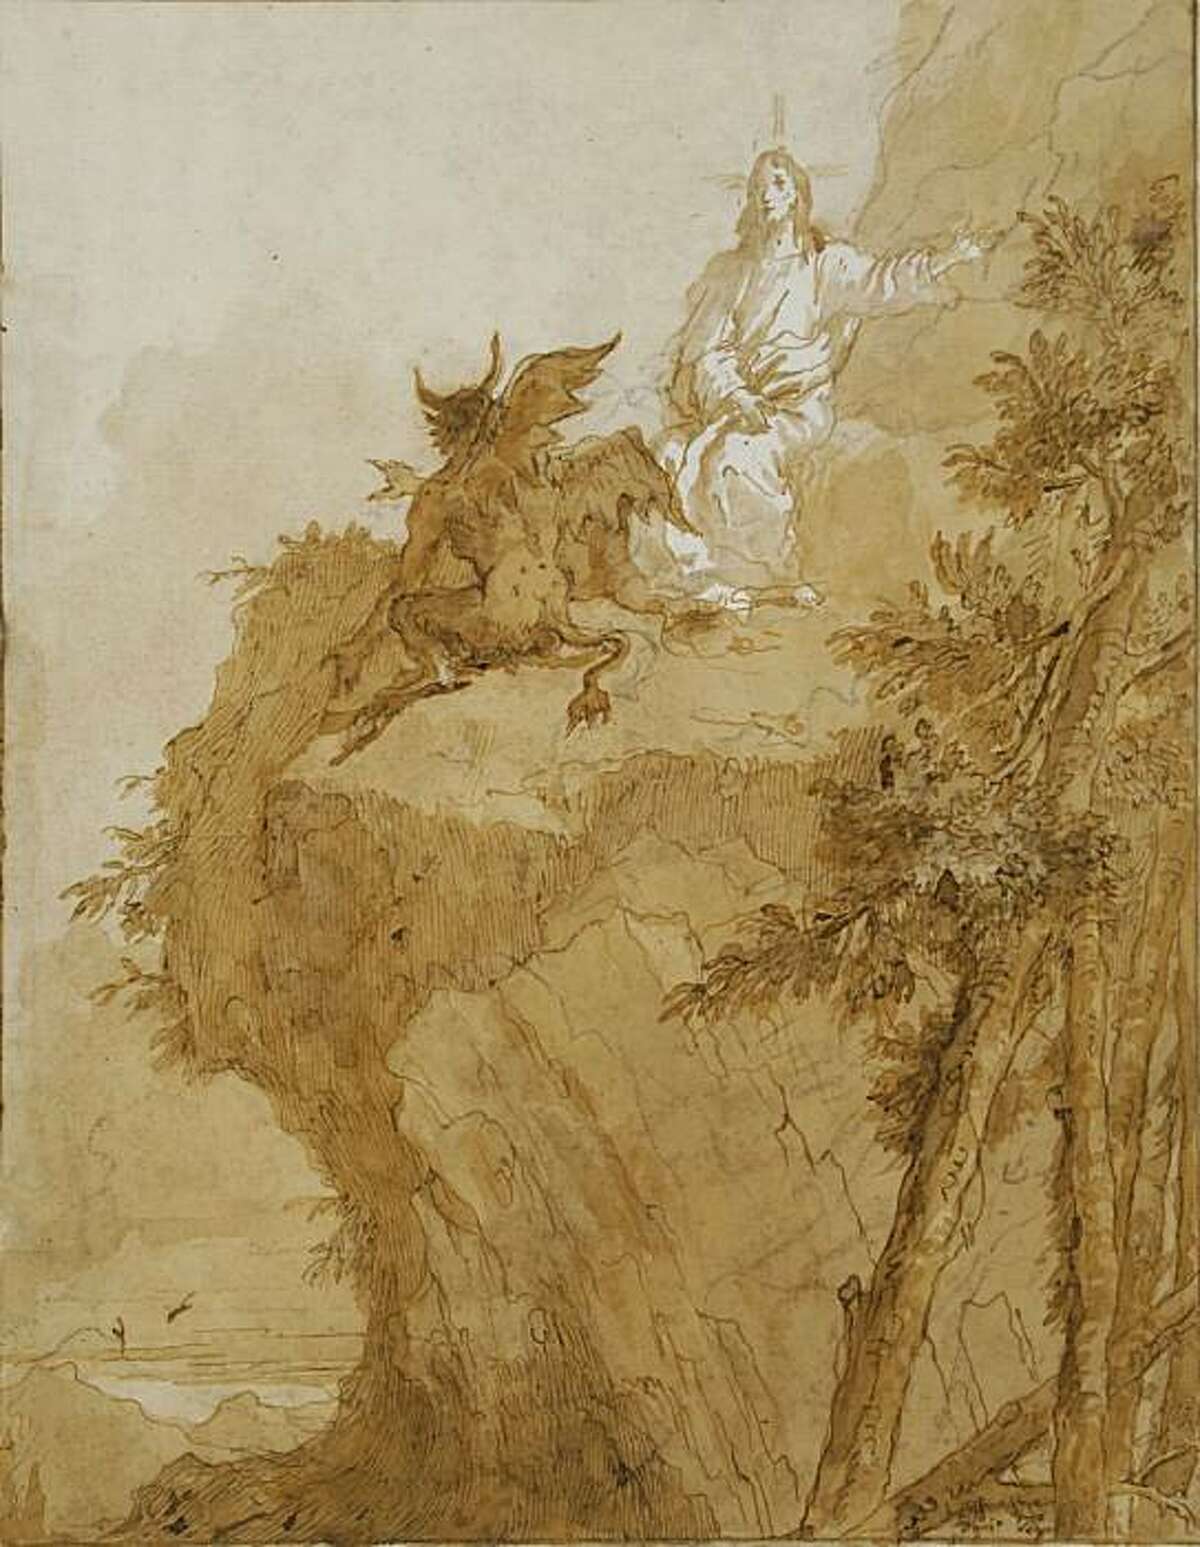 "The Third Temptation of Jesus" (c. 1786-90) pen and ink wash over black chalk by Domenico Tiepolo